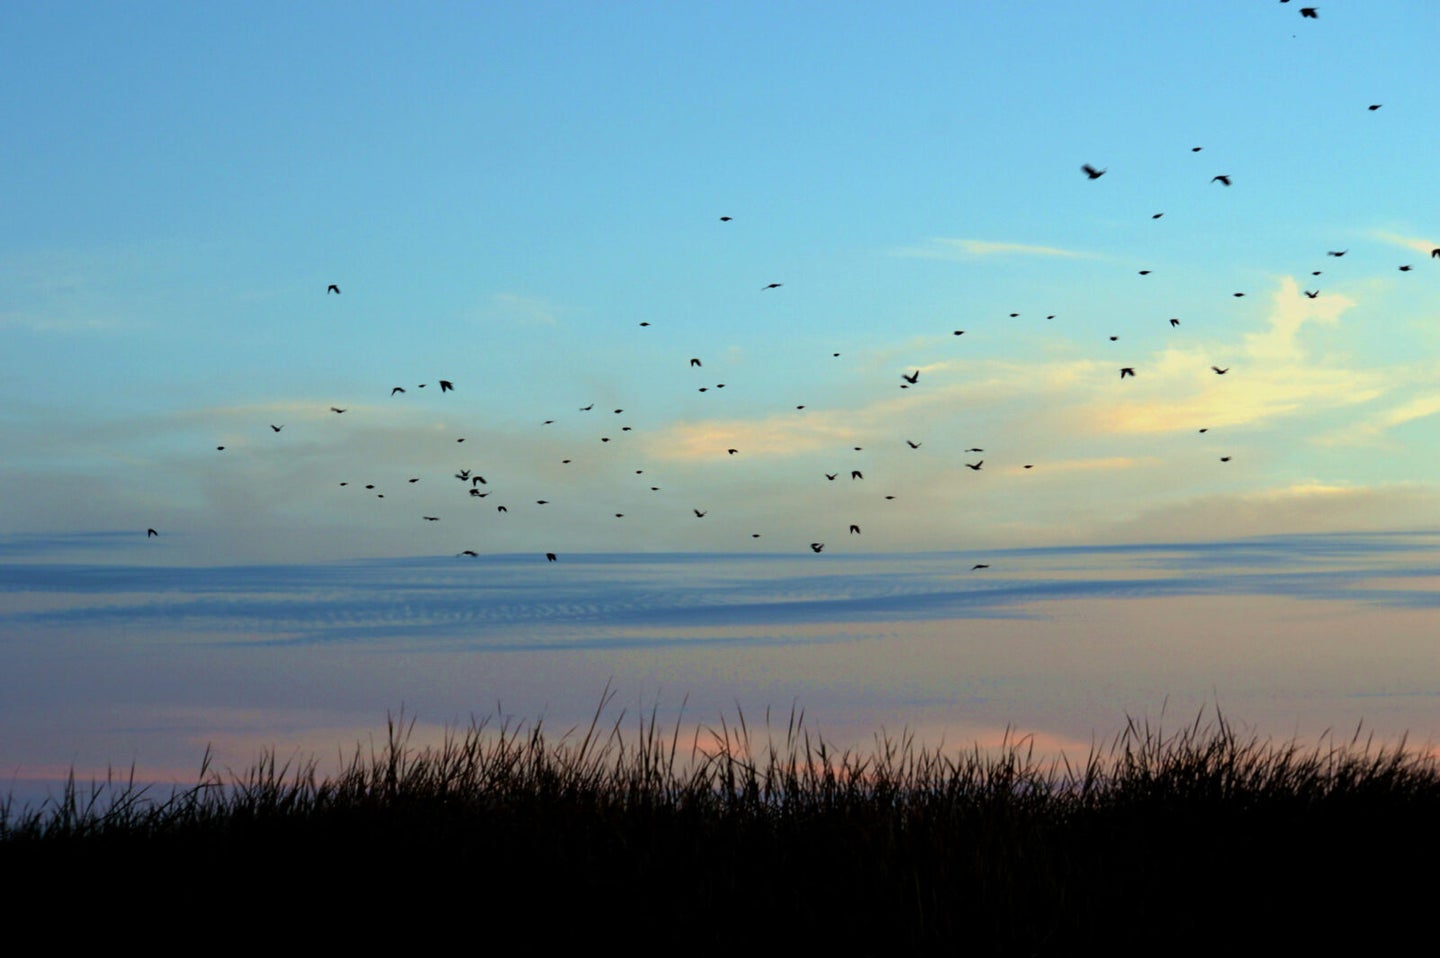 Sunset on a prairie with a flock of birds silhouetted against the sky.